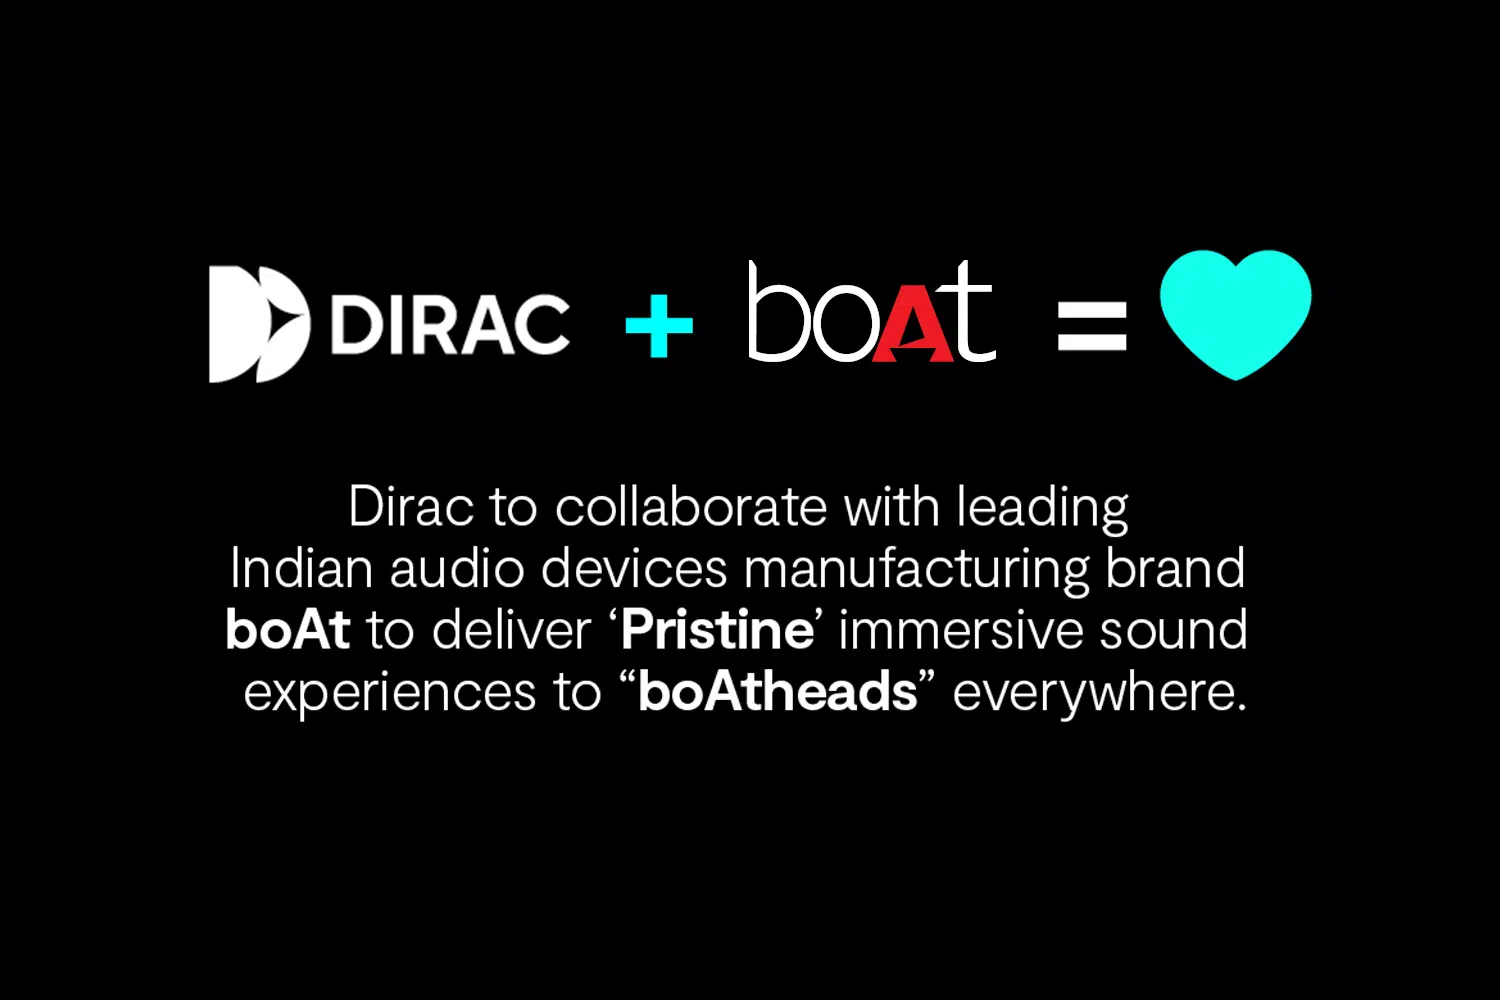 boAt has unveiled some of its audio products at CES 2023 in collaboration with Dirac